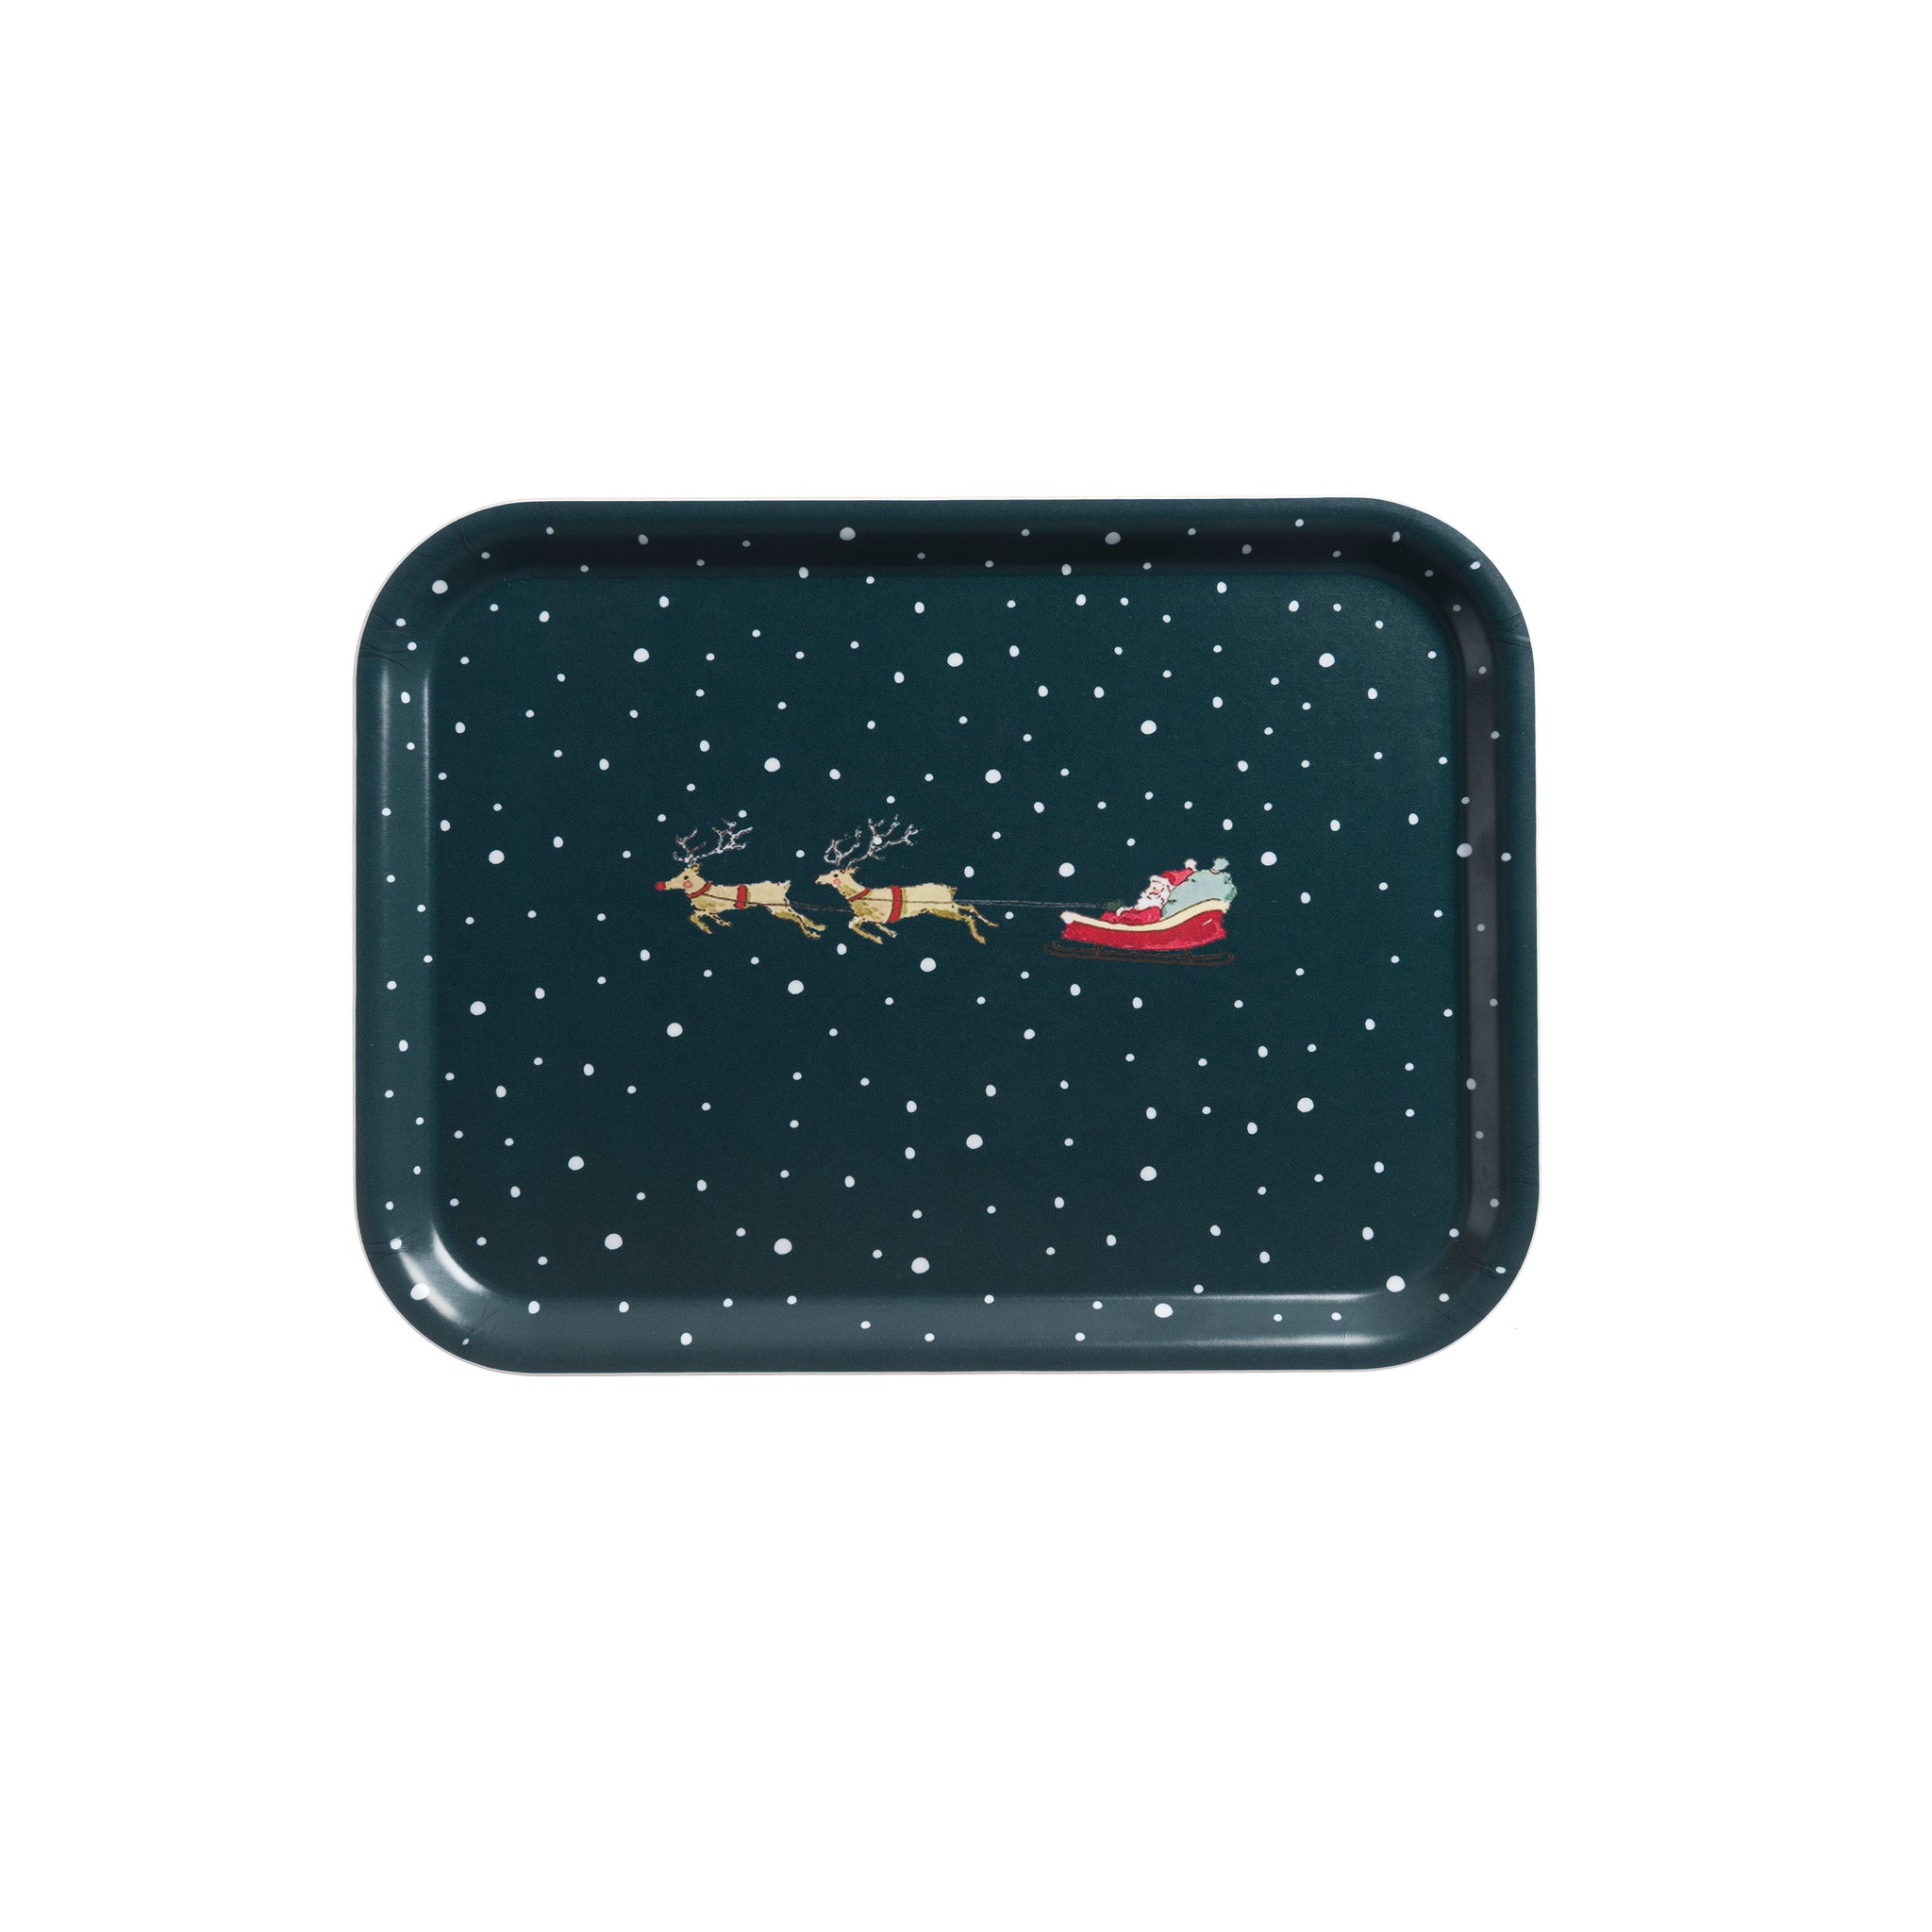 Home for Christmas Serving Tray - Small